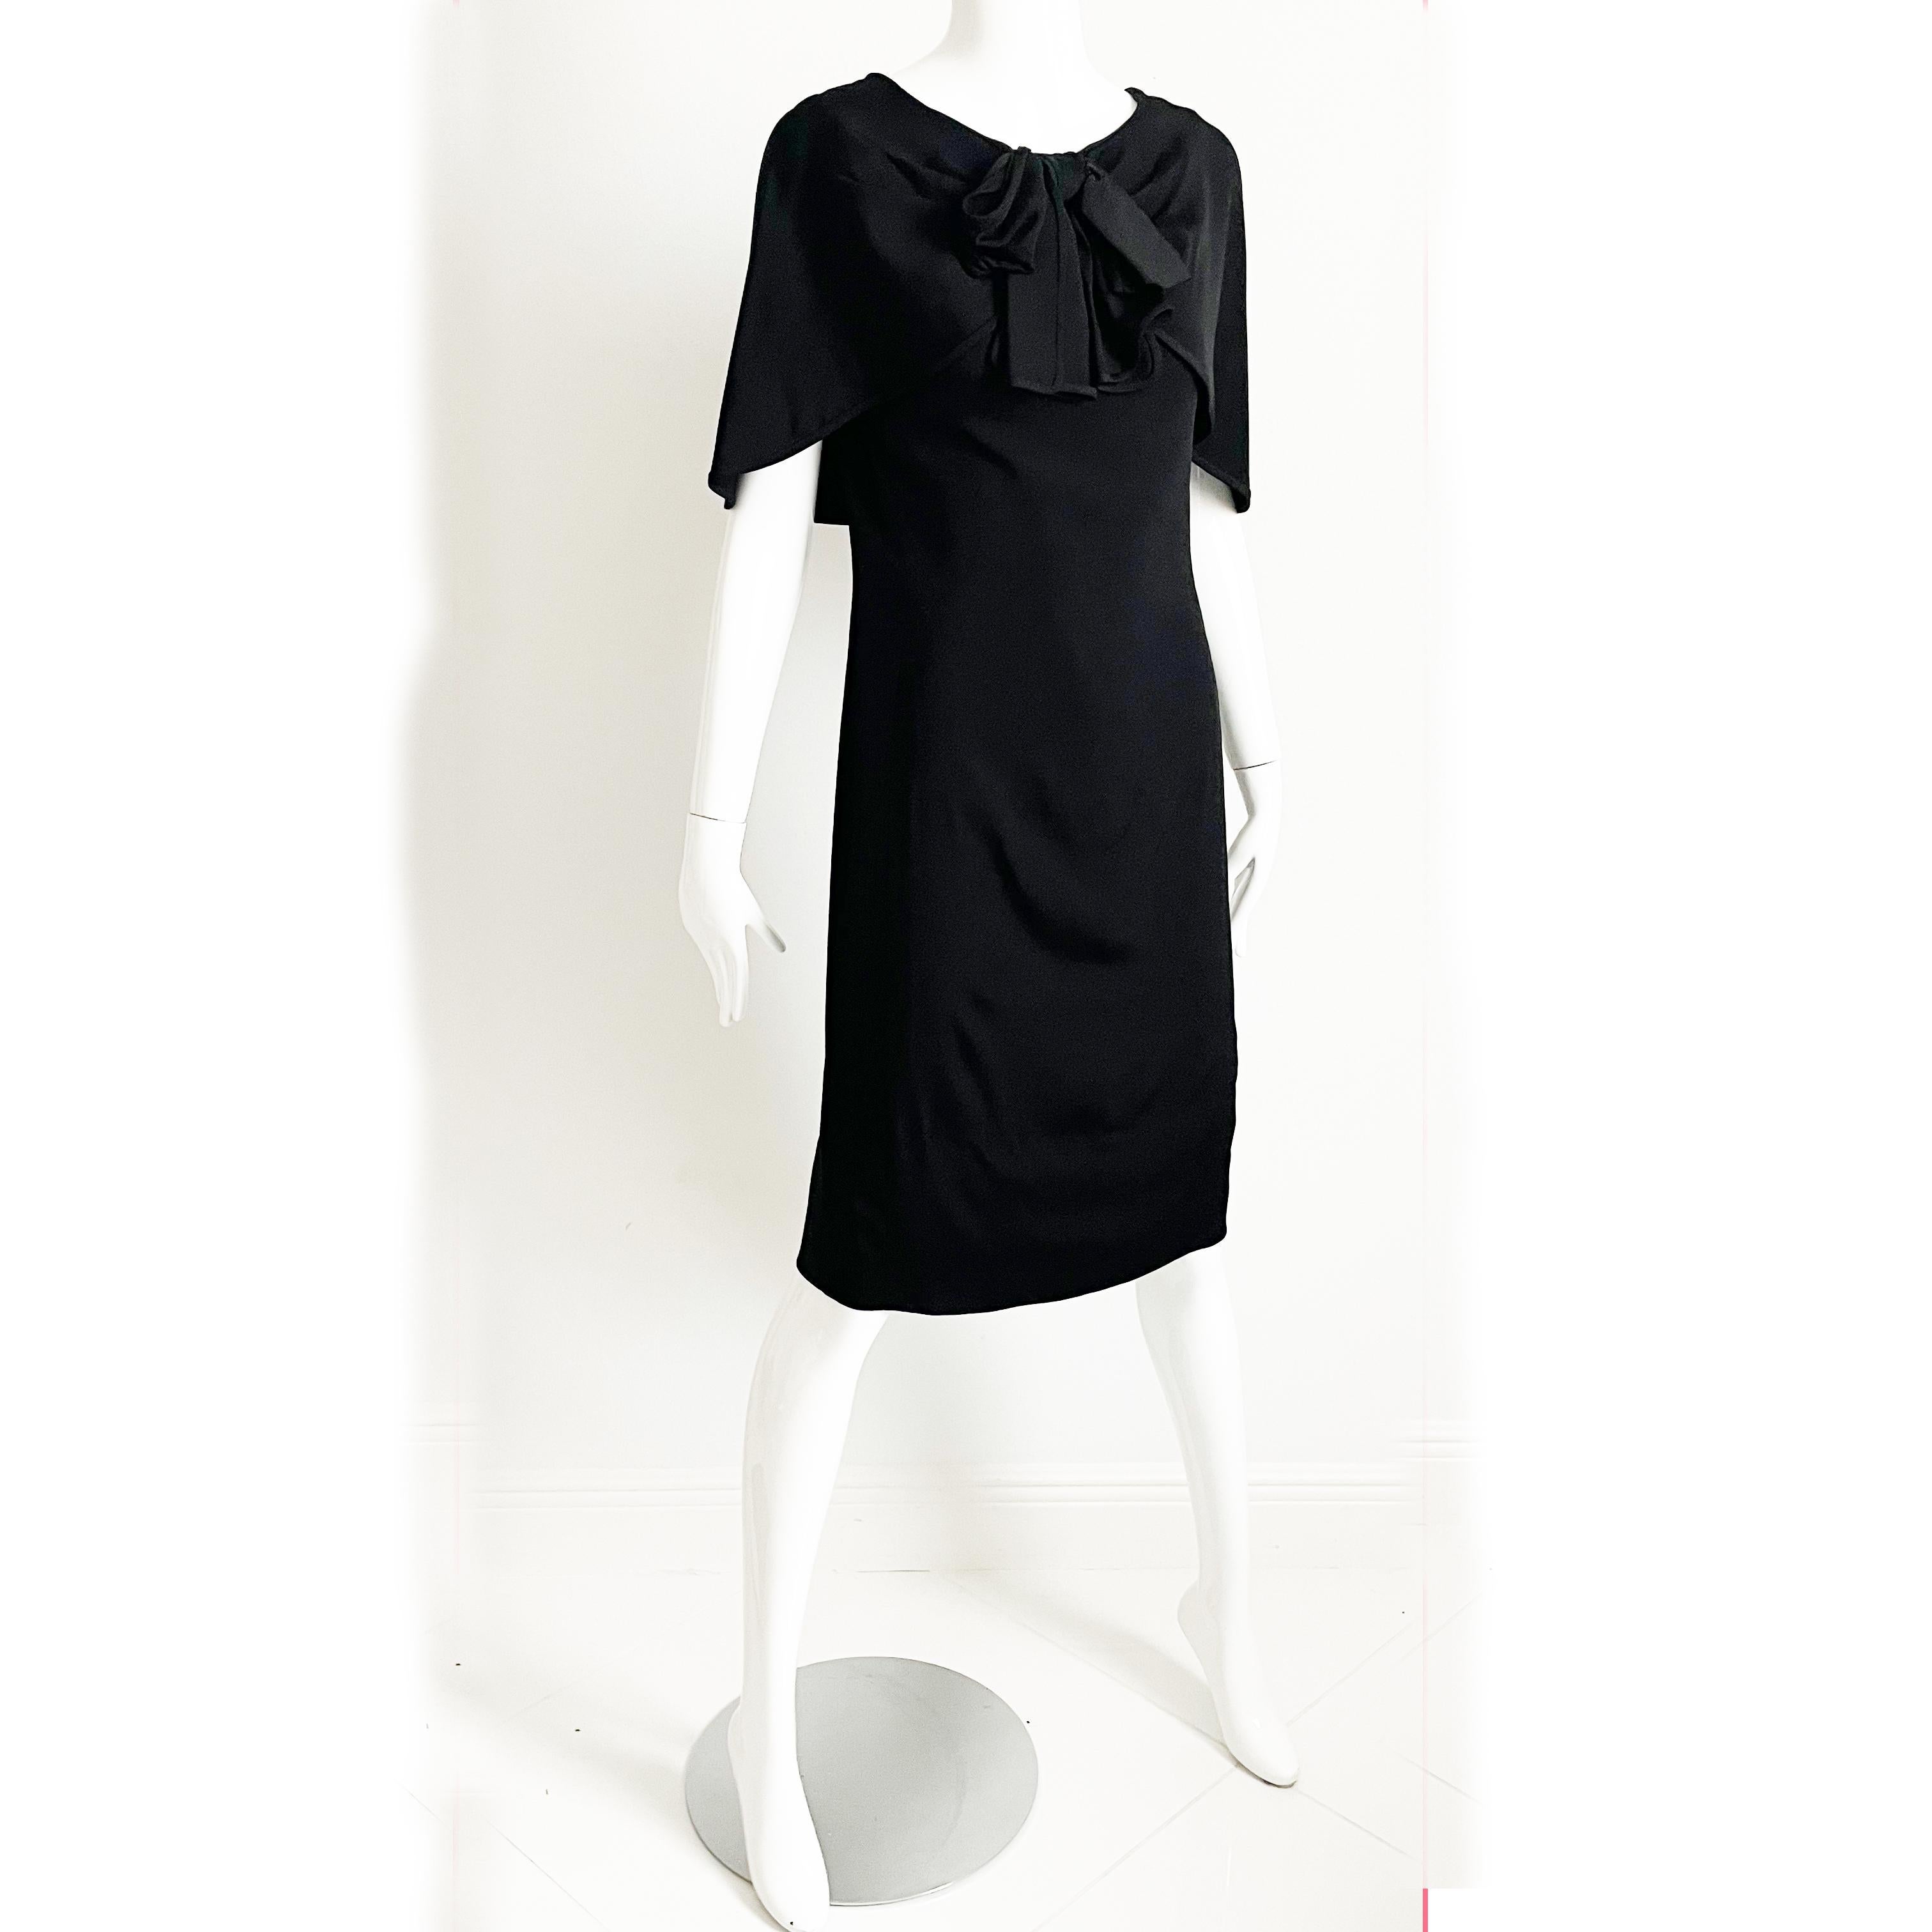 This incredible little black dress is an early Pauline Trigere piece, dating to the 1950s. 

Made from a supple black silk fabric, it features a draped shawl collar with a black silk bow design at the chest and a chic lower cut back.  

Simple and